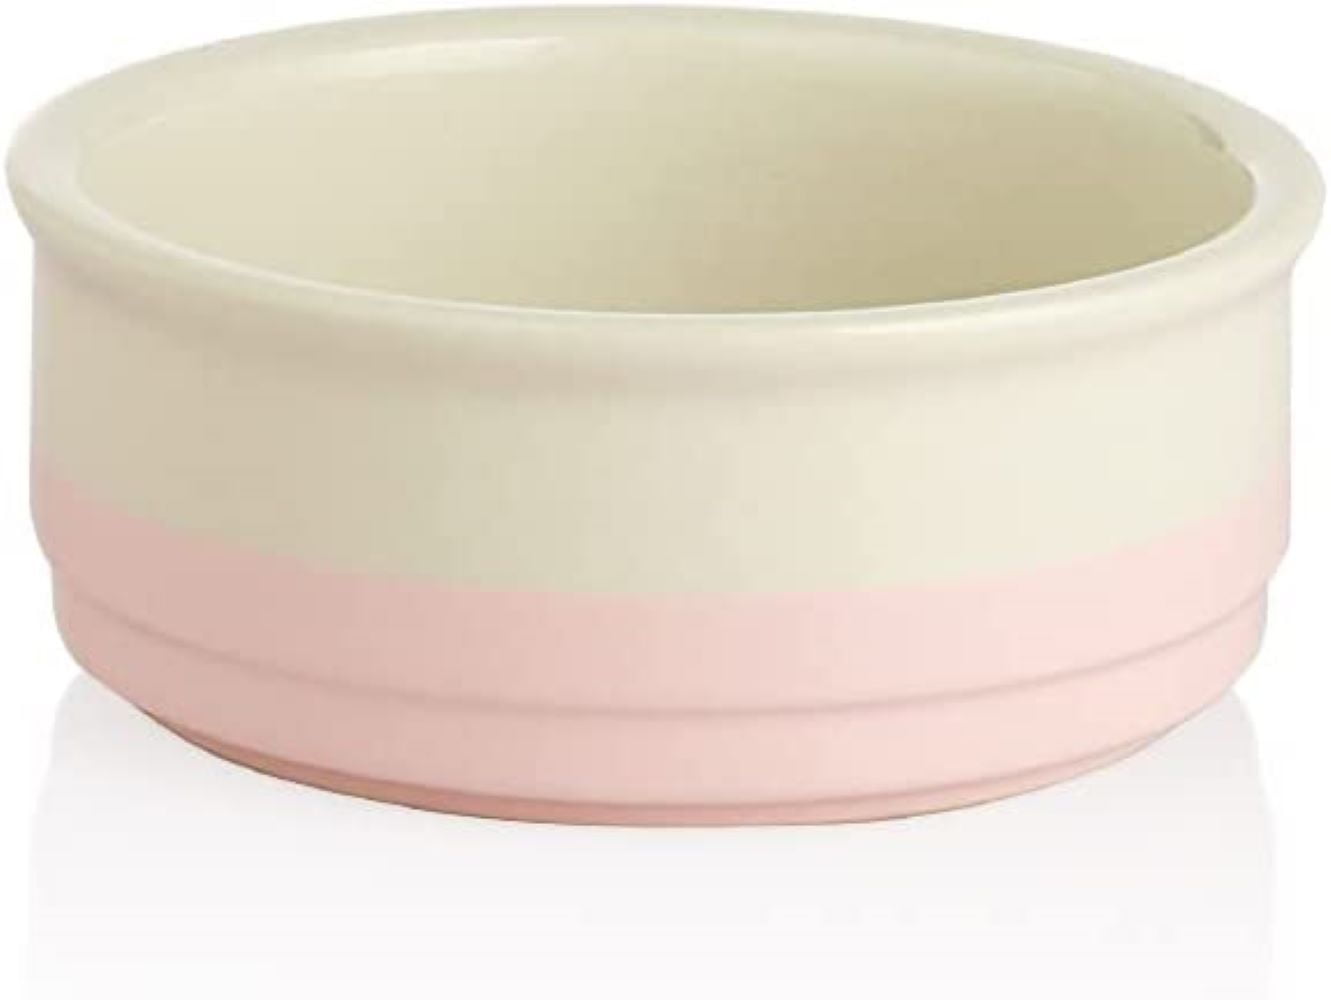 SWEEJAR Ceramic Dog Bowls, Dog Food Dish for Small Dogs and Cat